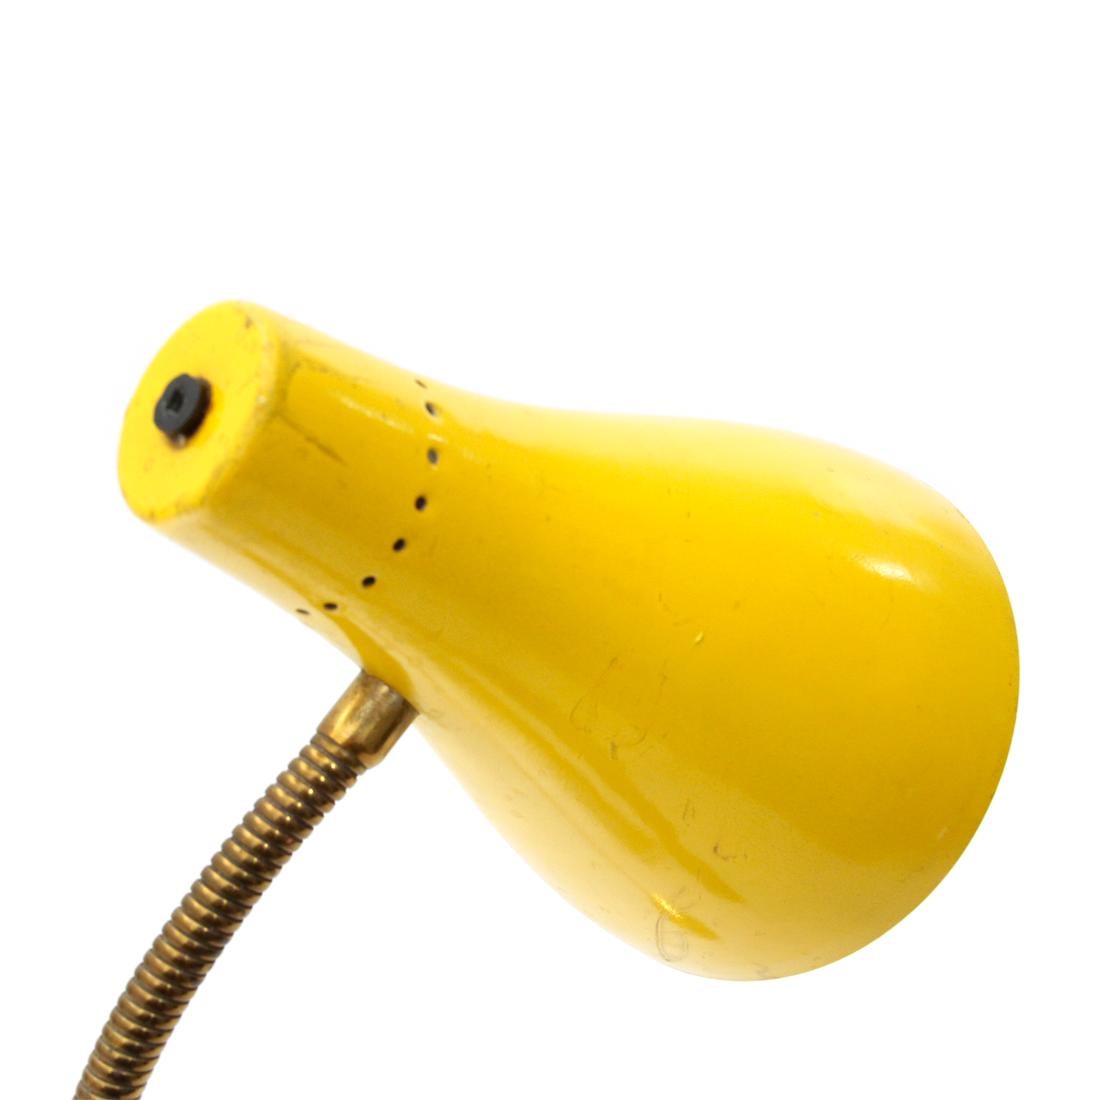 Italian manufactured floor lamp produced in the 1950s.
Circular base in brass.
Brass stem with articulated end part.
Diffuser in yellow painted aluminum externally.
Structure in good condition, signs due to normal use over time, a hit on the